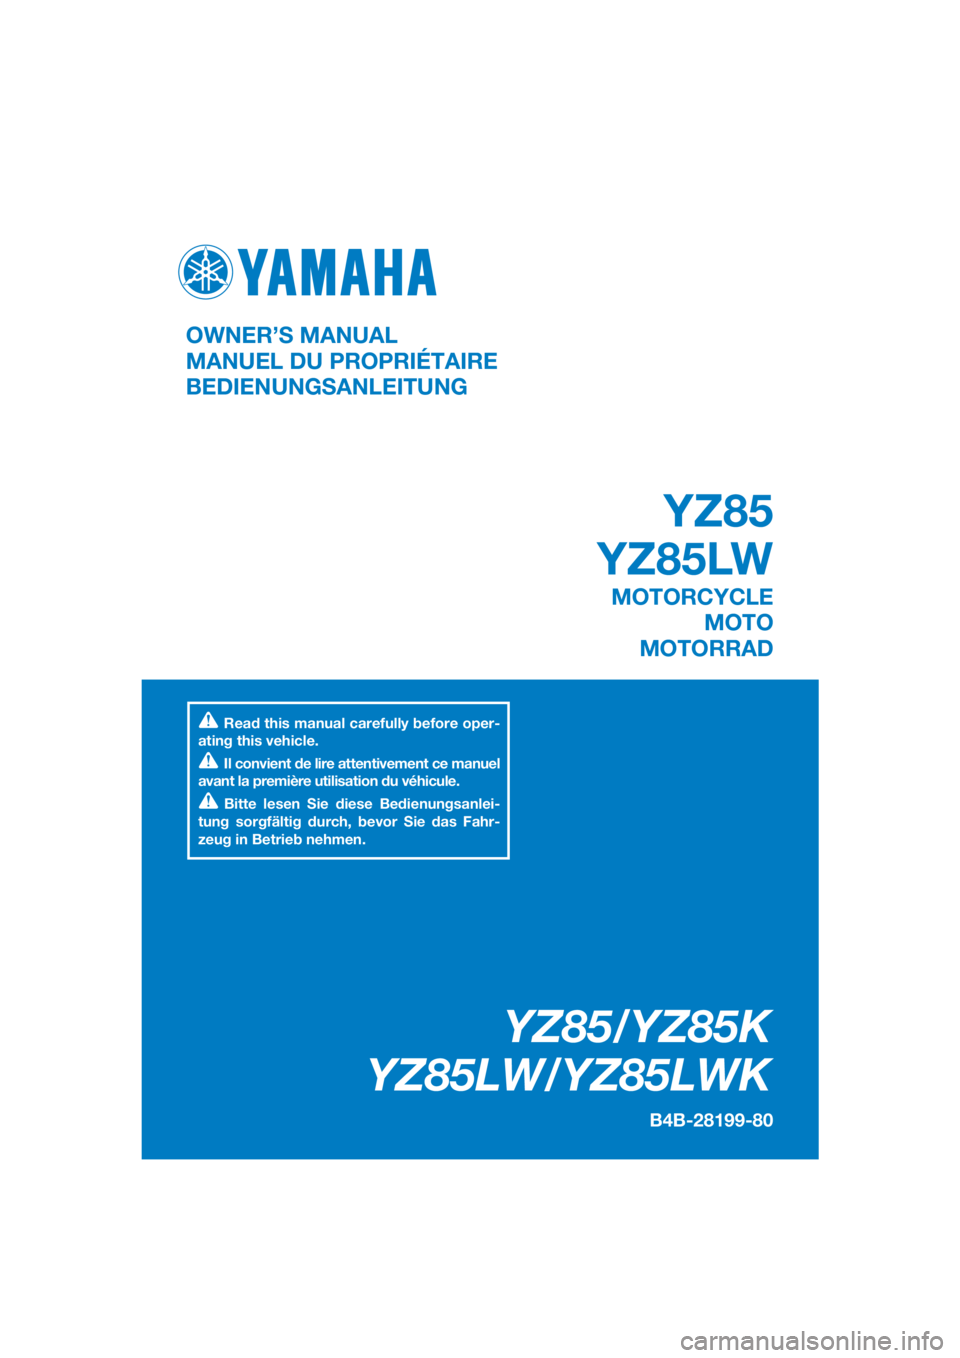 YAMAHA YZ85 2019  Notices Demploi (in French) DIC183
YZ85/YZ85K
YZ85LW/YZ85LWK
B4B-28199-80
OWNER’S MANUAL
MANUEL DU PROPRIÉTAIRE
BEDIENUNGSANLEITUNG
Read this manual carefully before oper-
ating this vehicle.
Il convient de lire attentivement